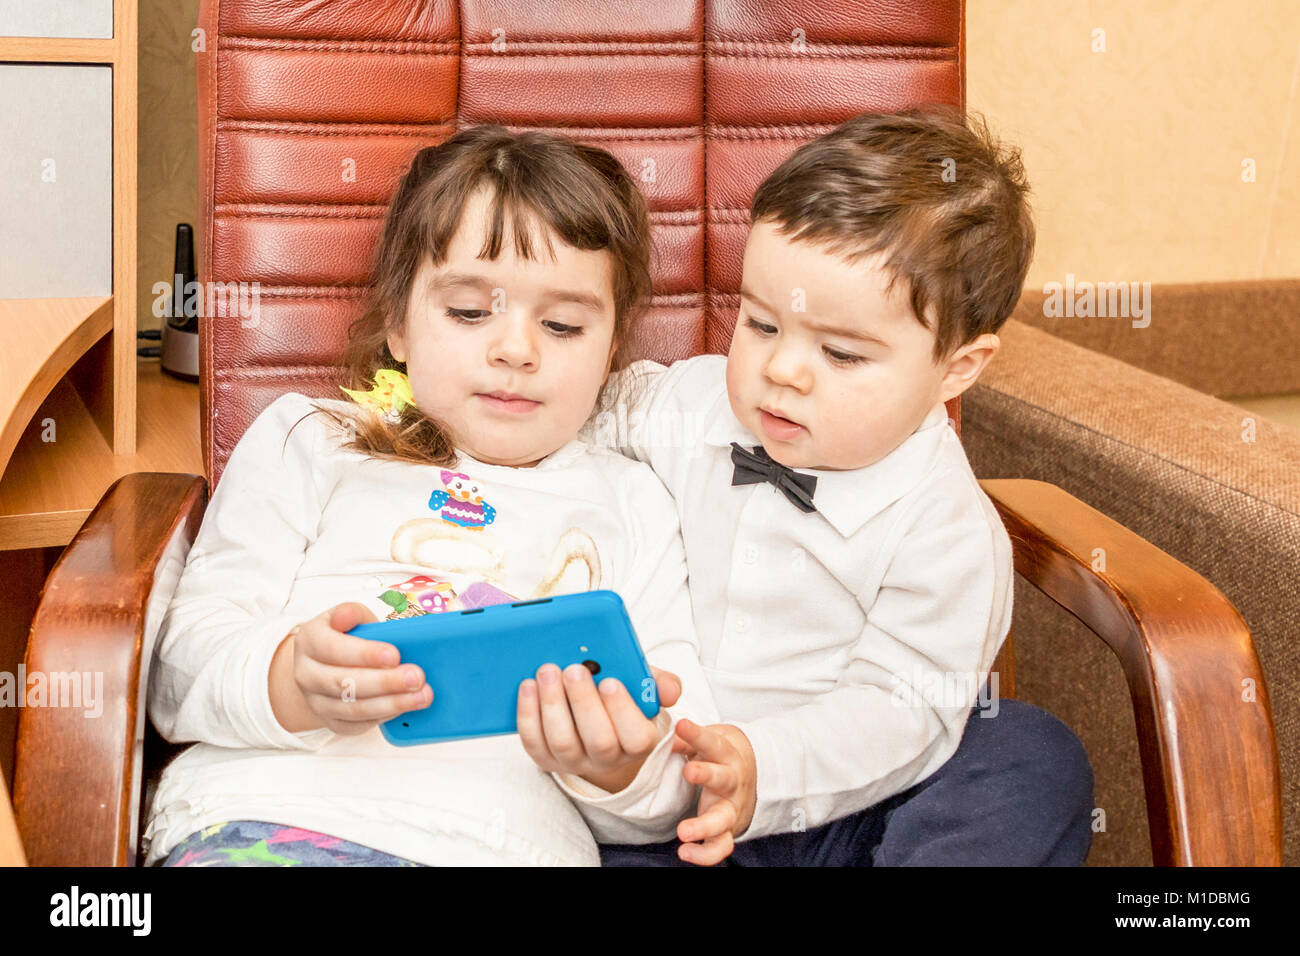 Little children with smartphone Stock Photo